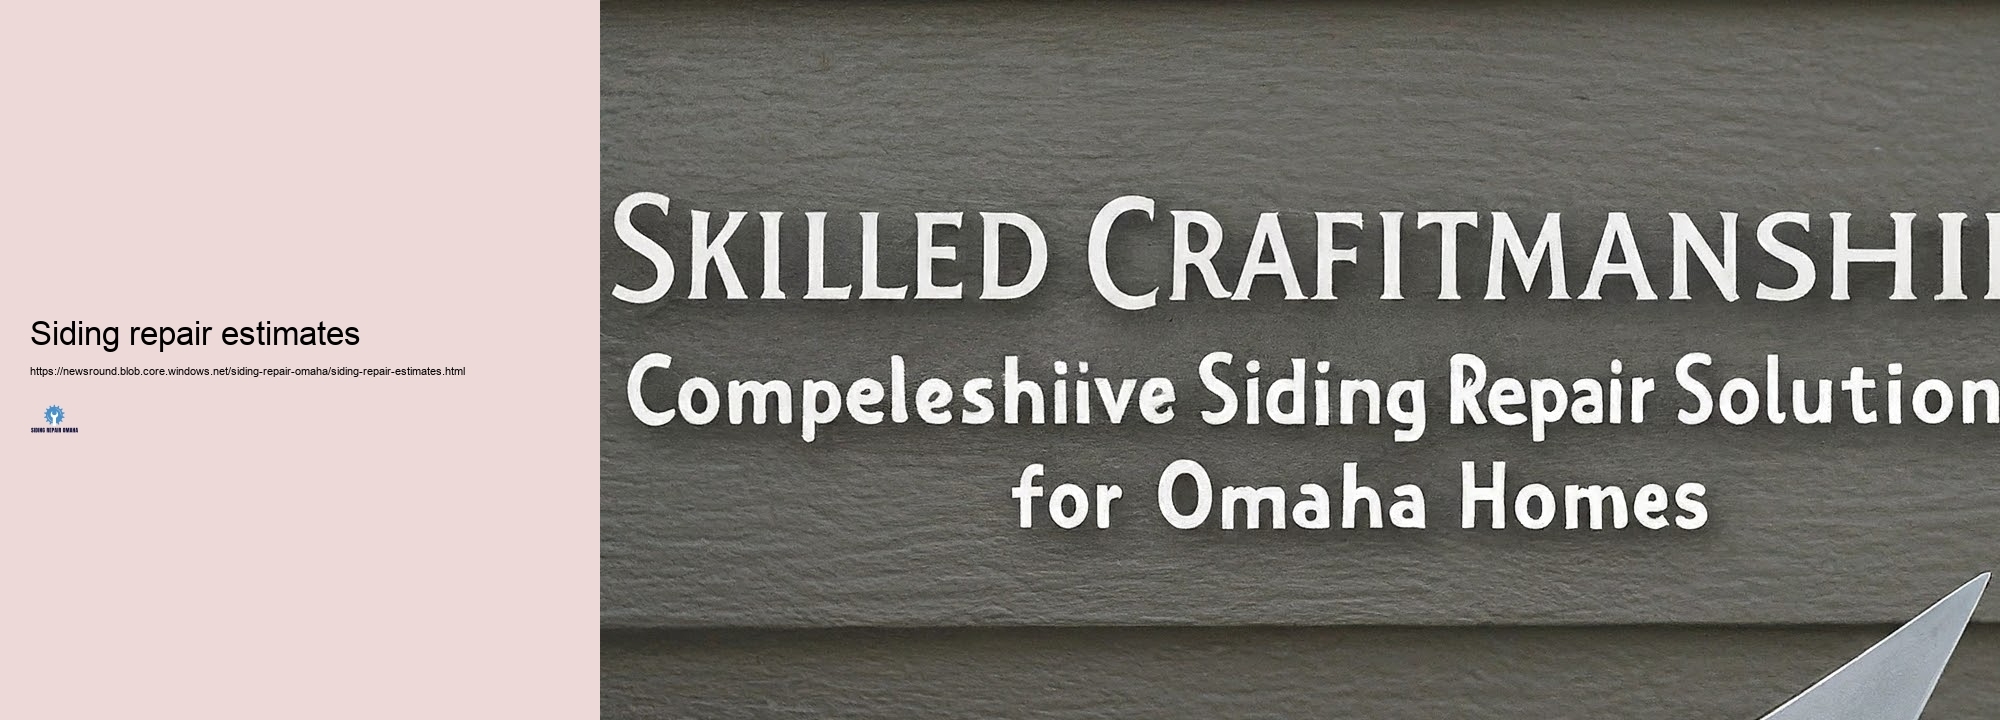 Consumer Success Stories: Siding Repair service Option in Omaha